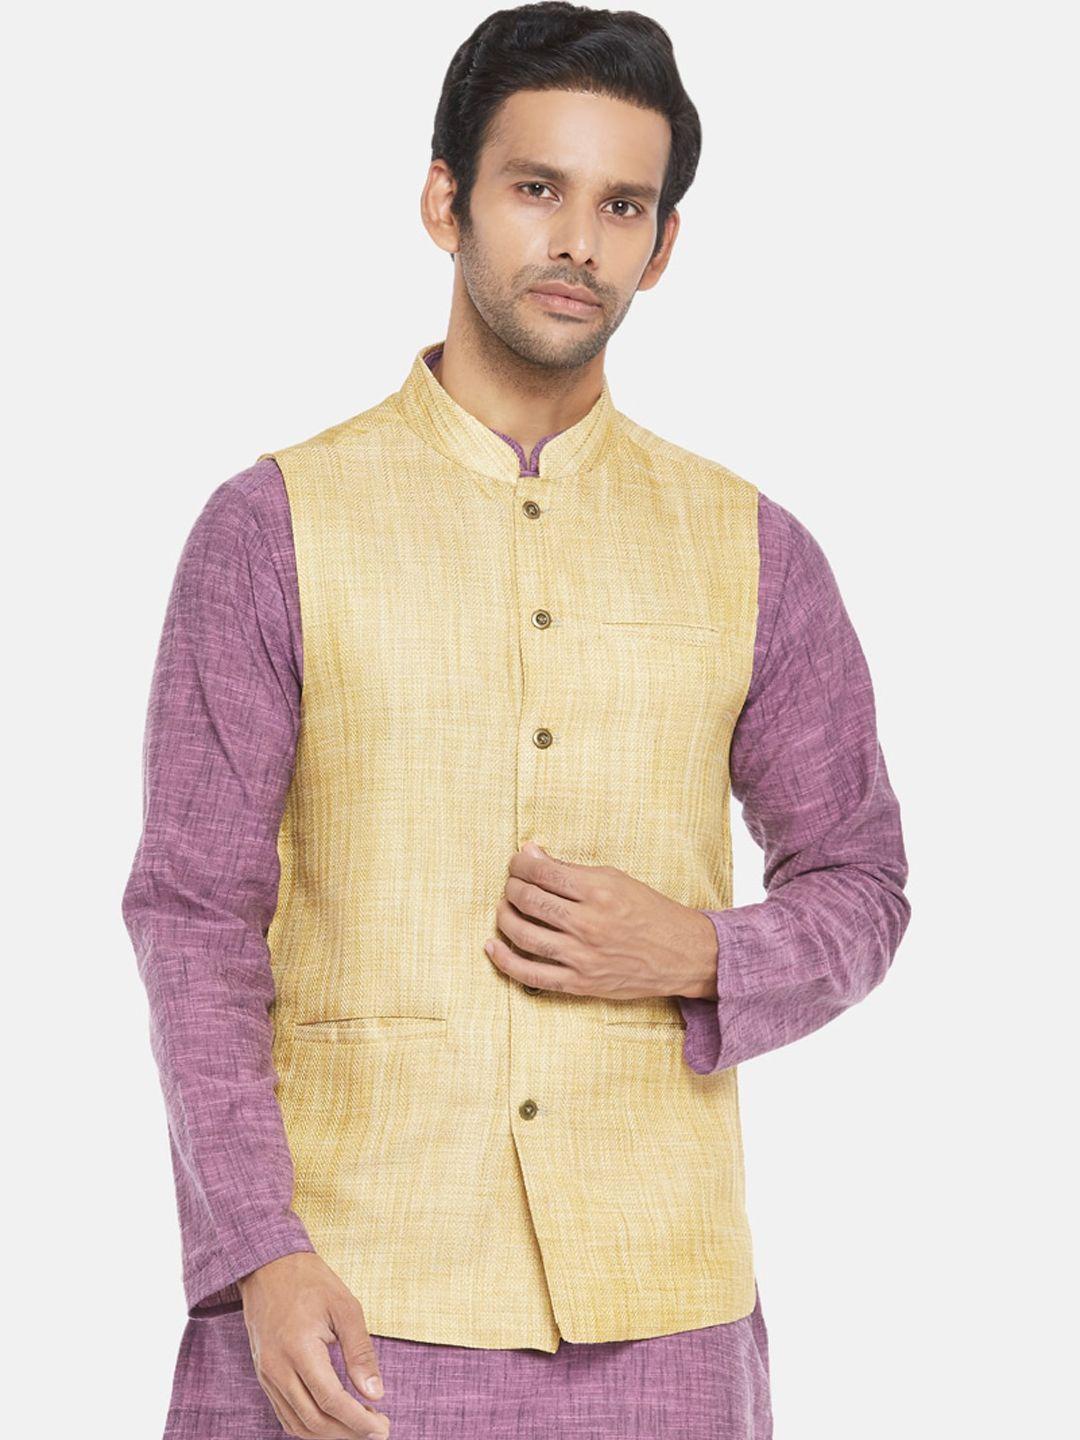 indus route by pantaloons men gold waistcoat